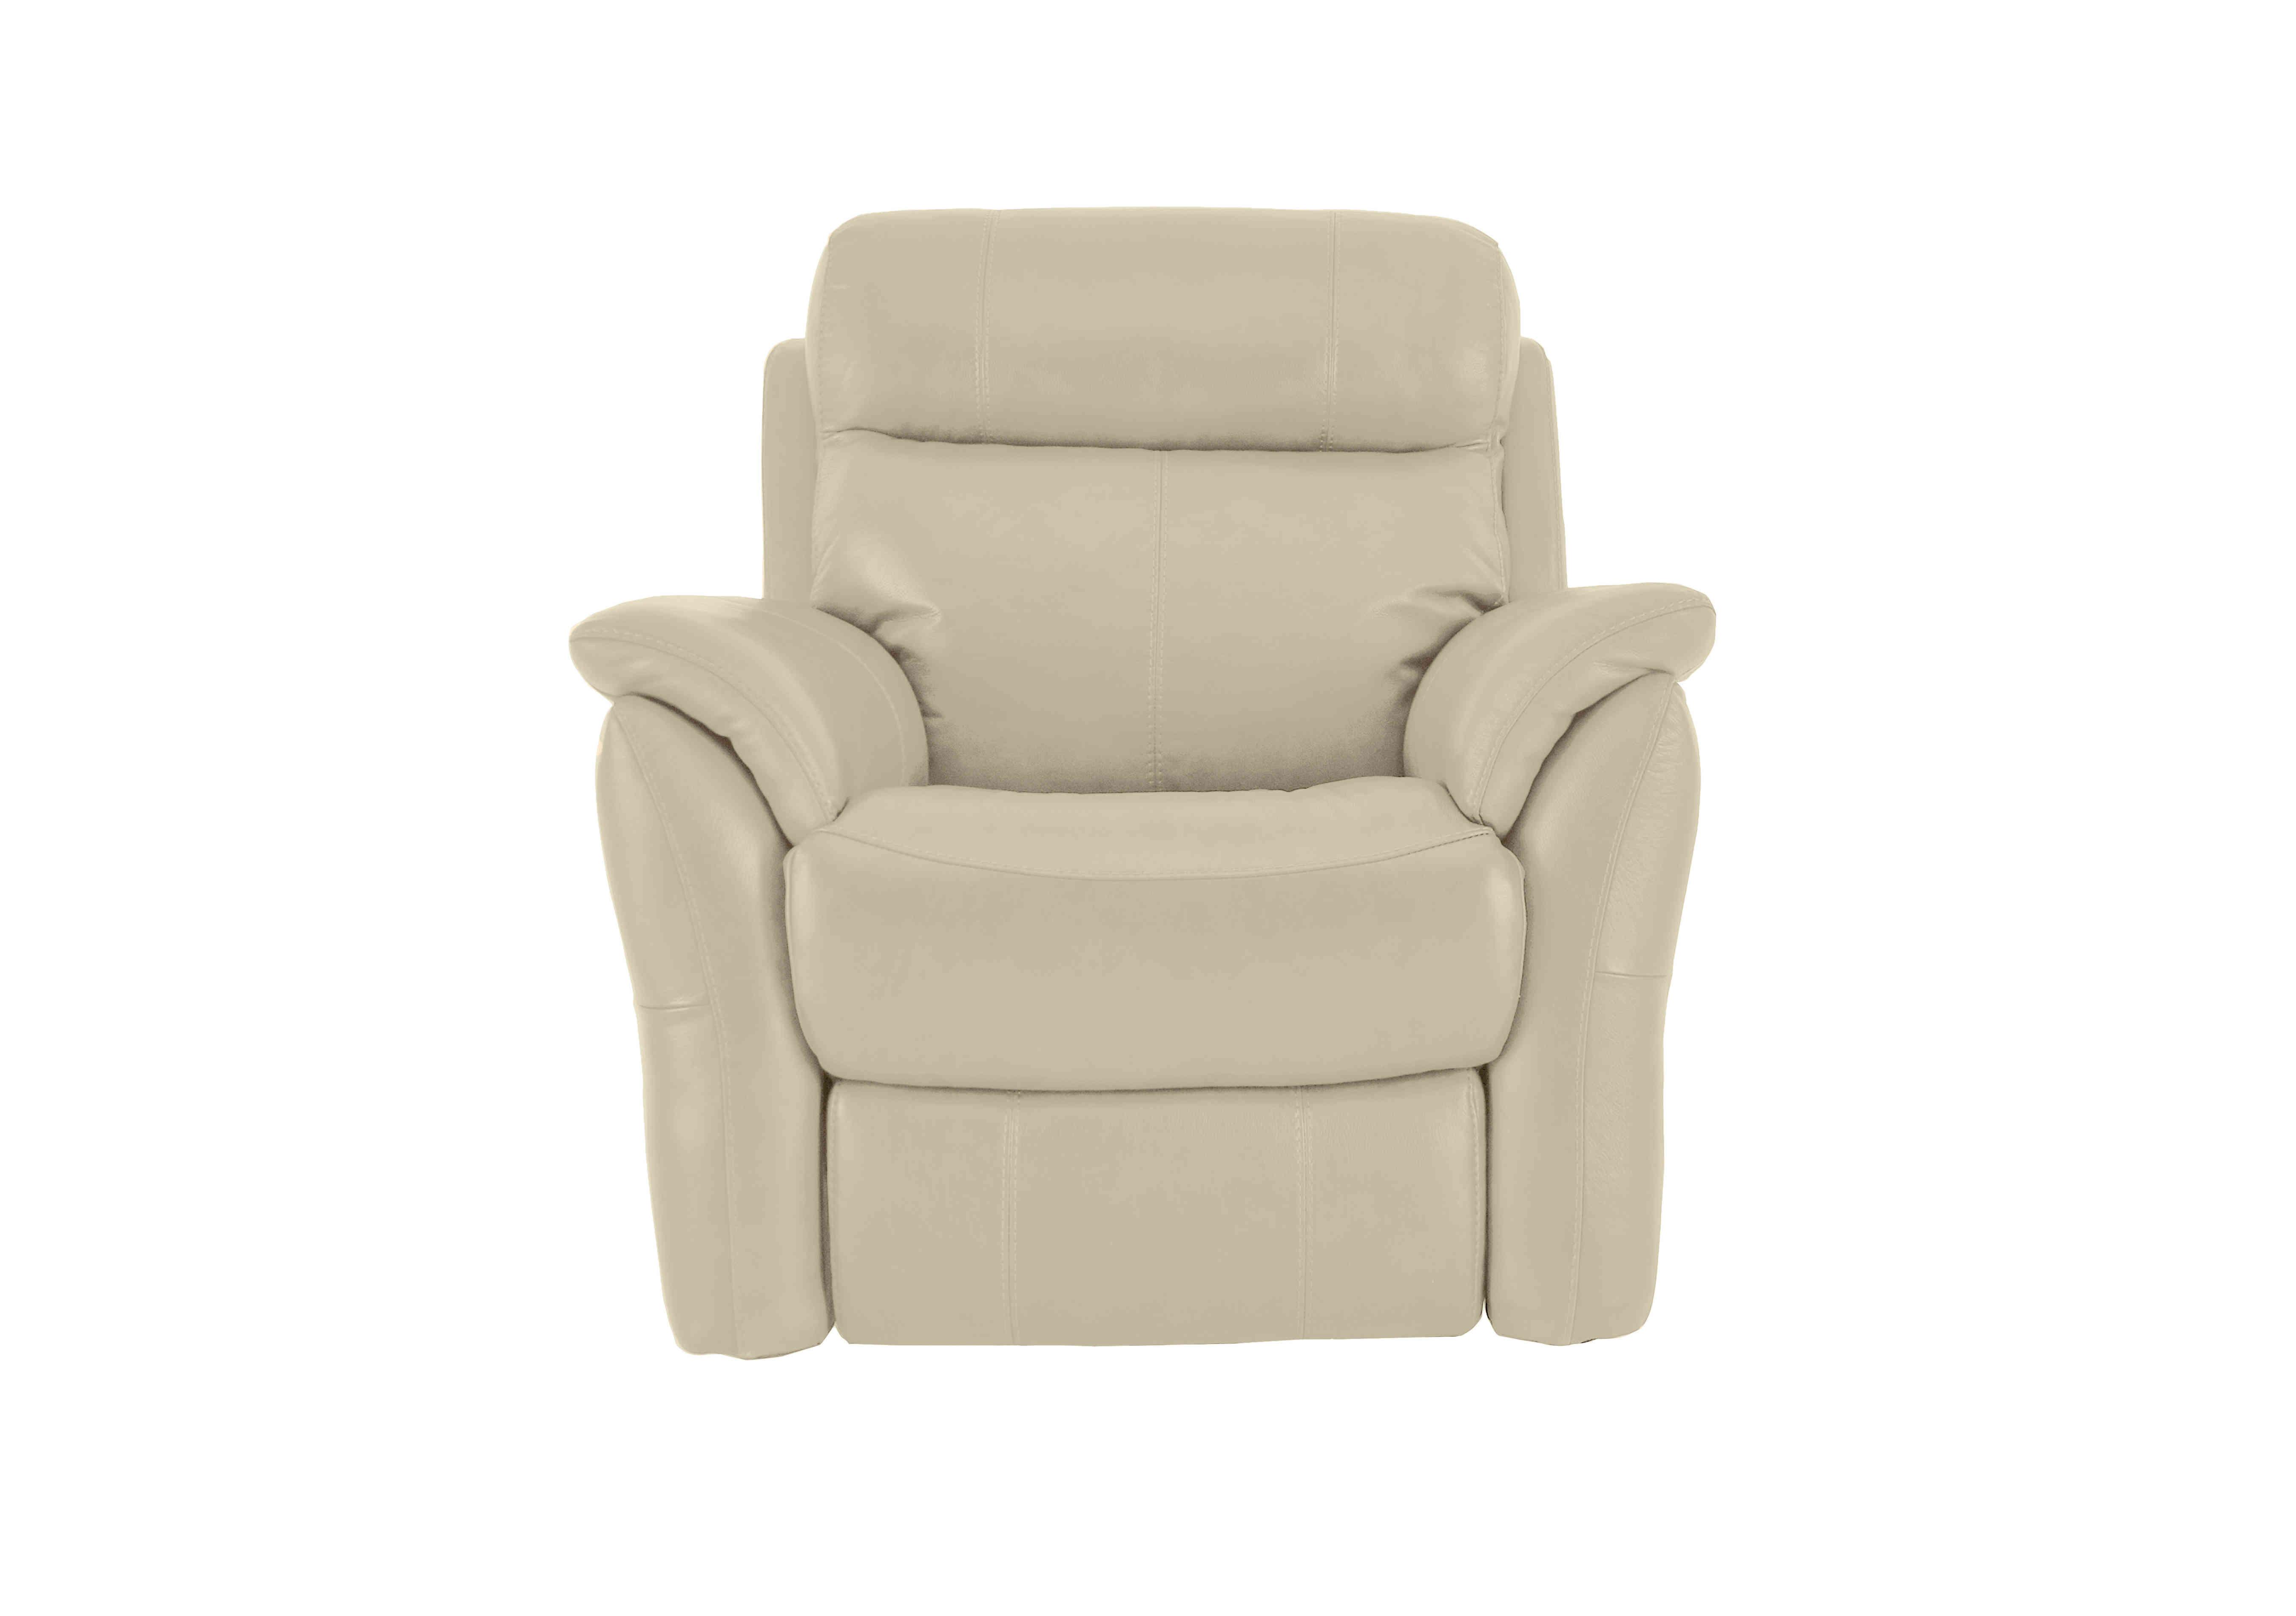 Relax Station Revive Leather Armchair in Bv-862c Bisque on Furniture Village